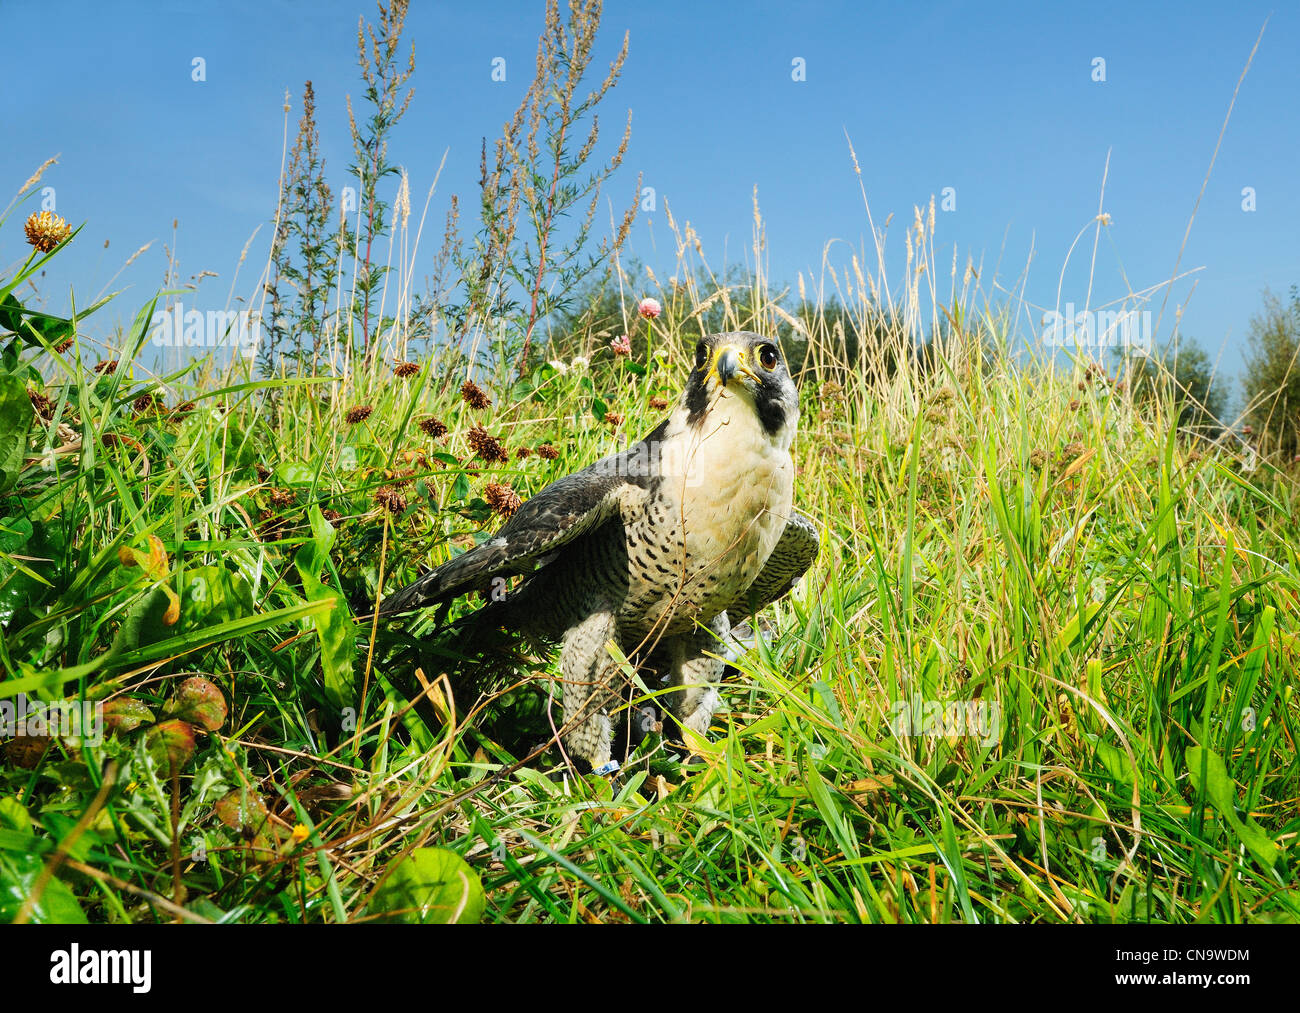 Hawk standing in grassy field Banque D'Images